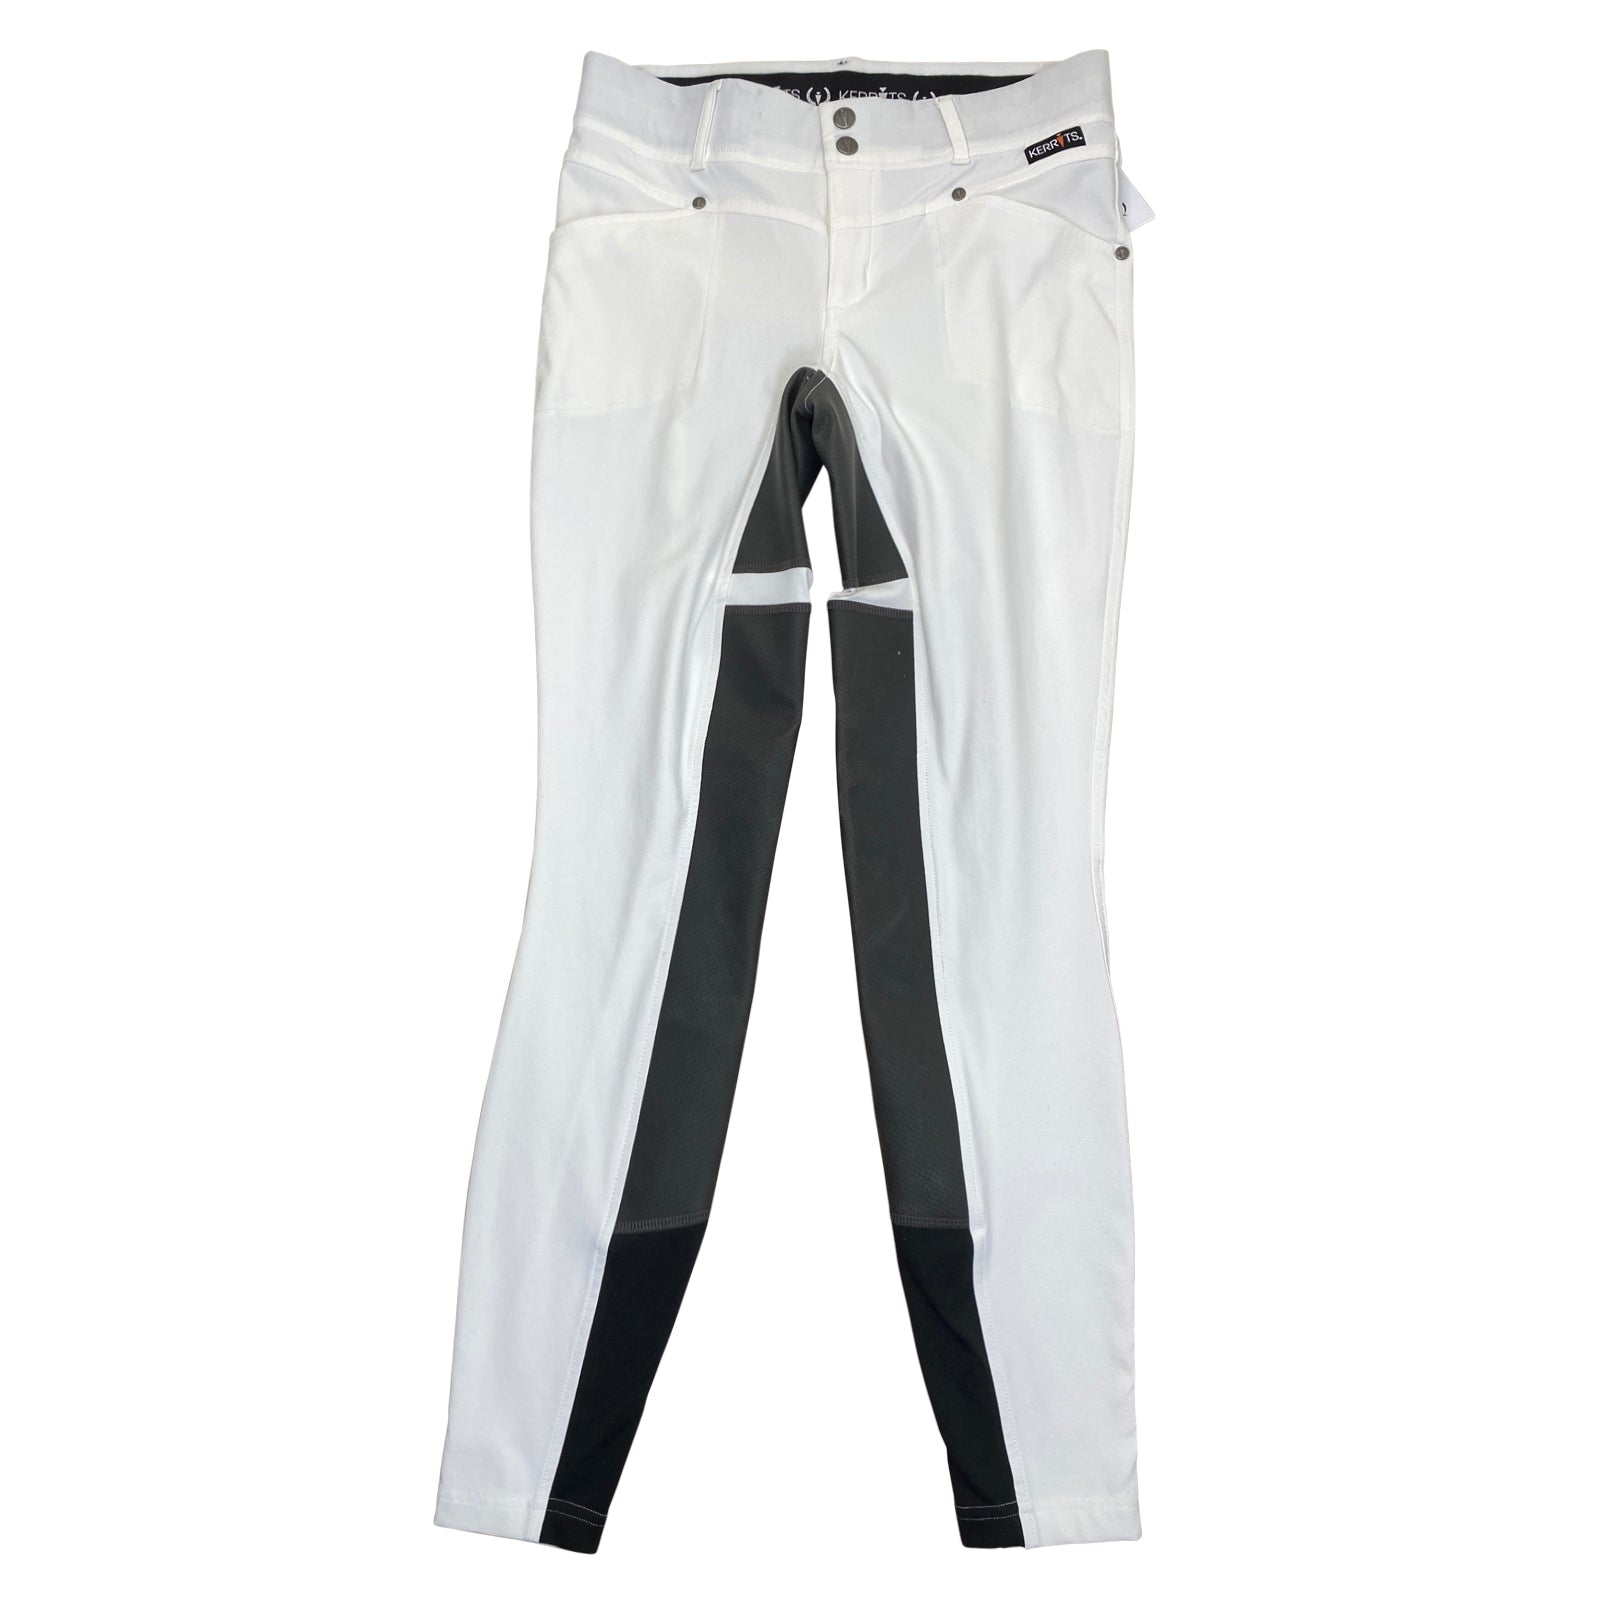 Kerrits Crossover II Full Seat Breeches in White/Grey